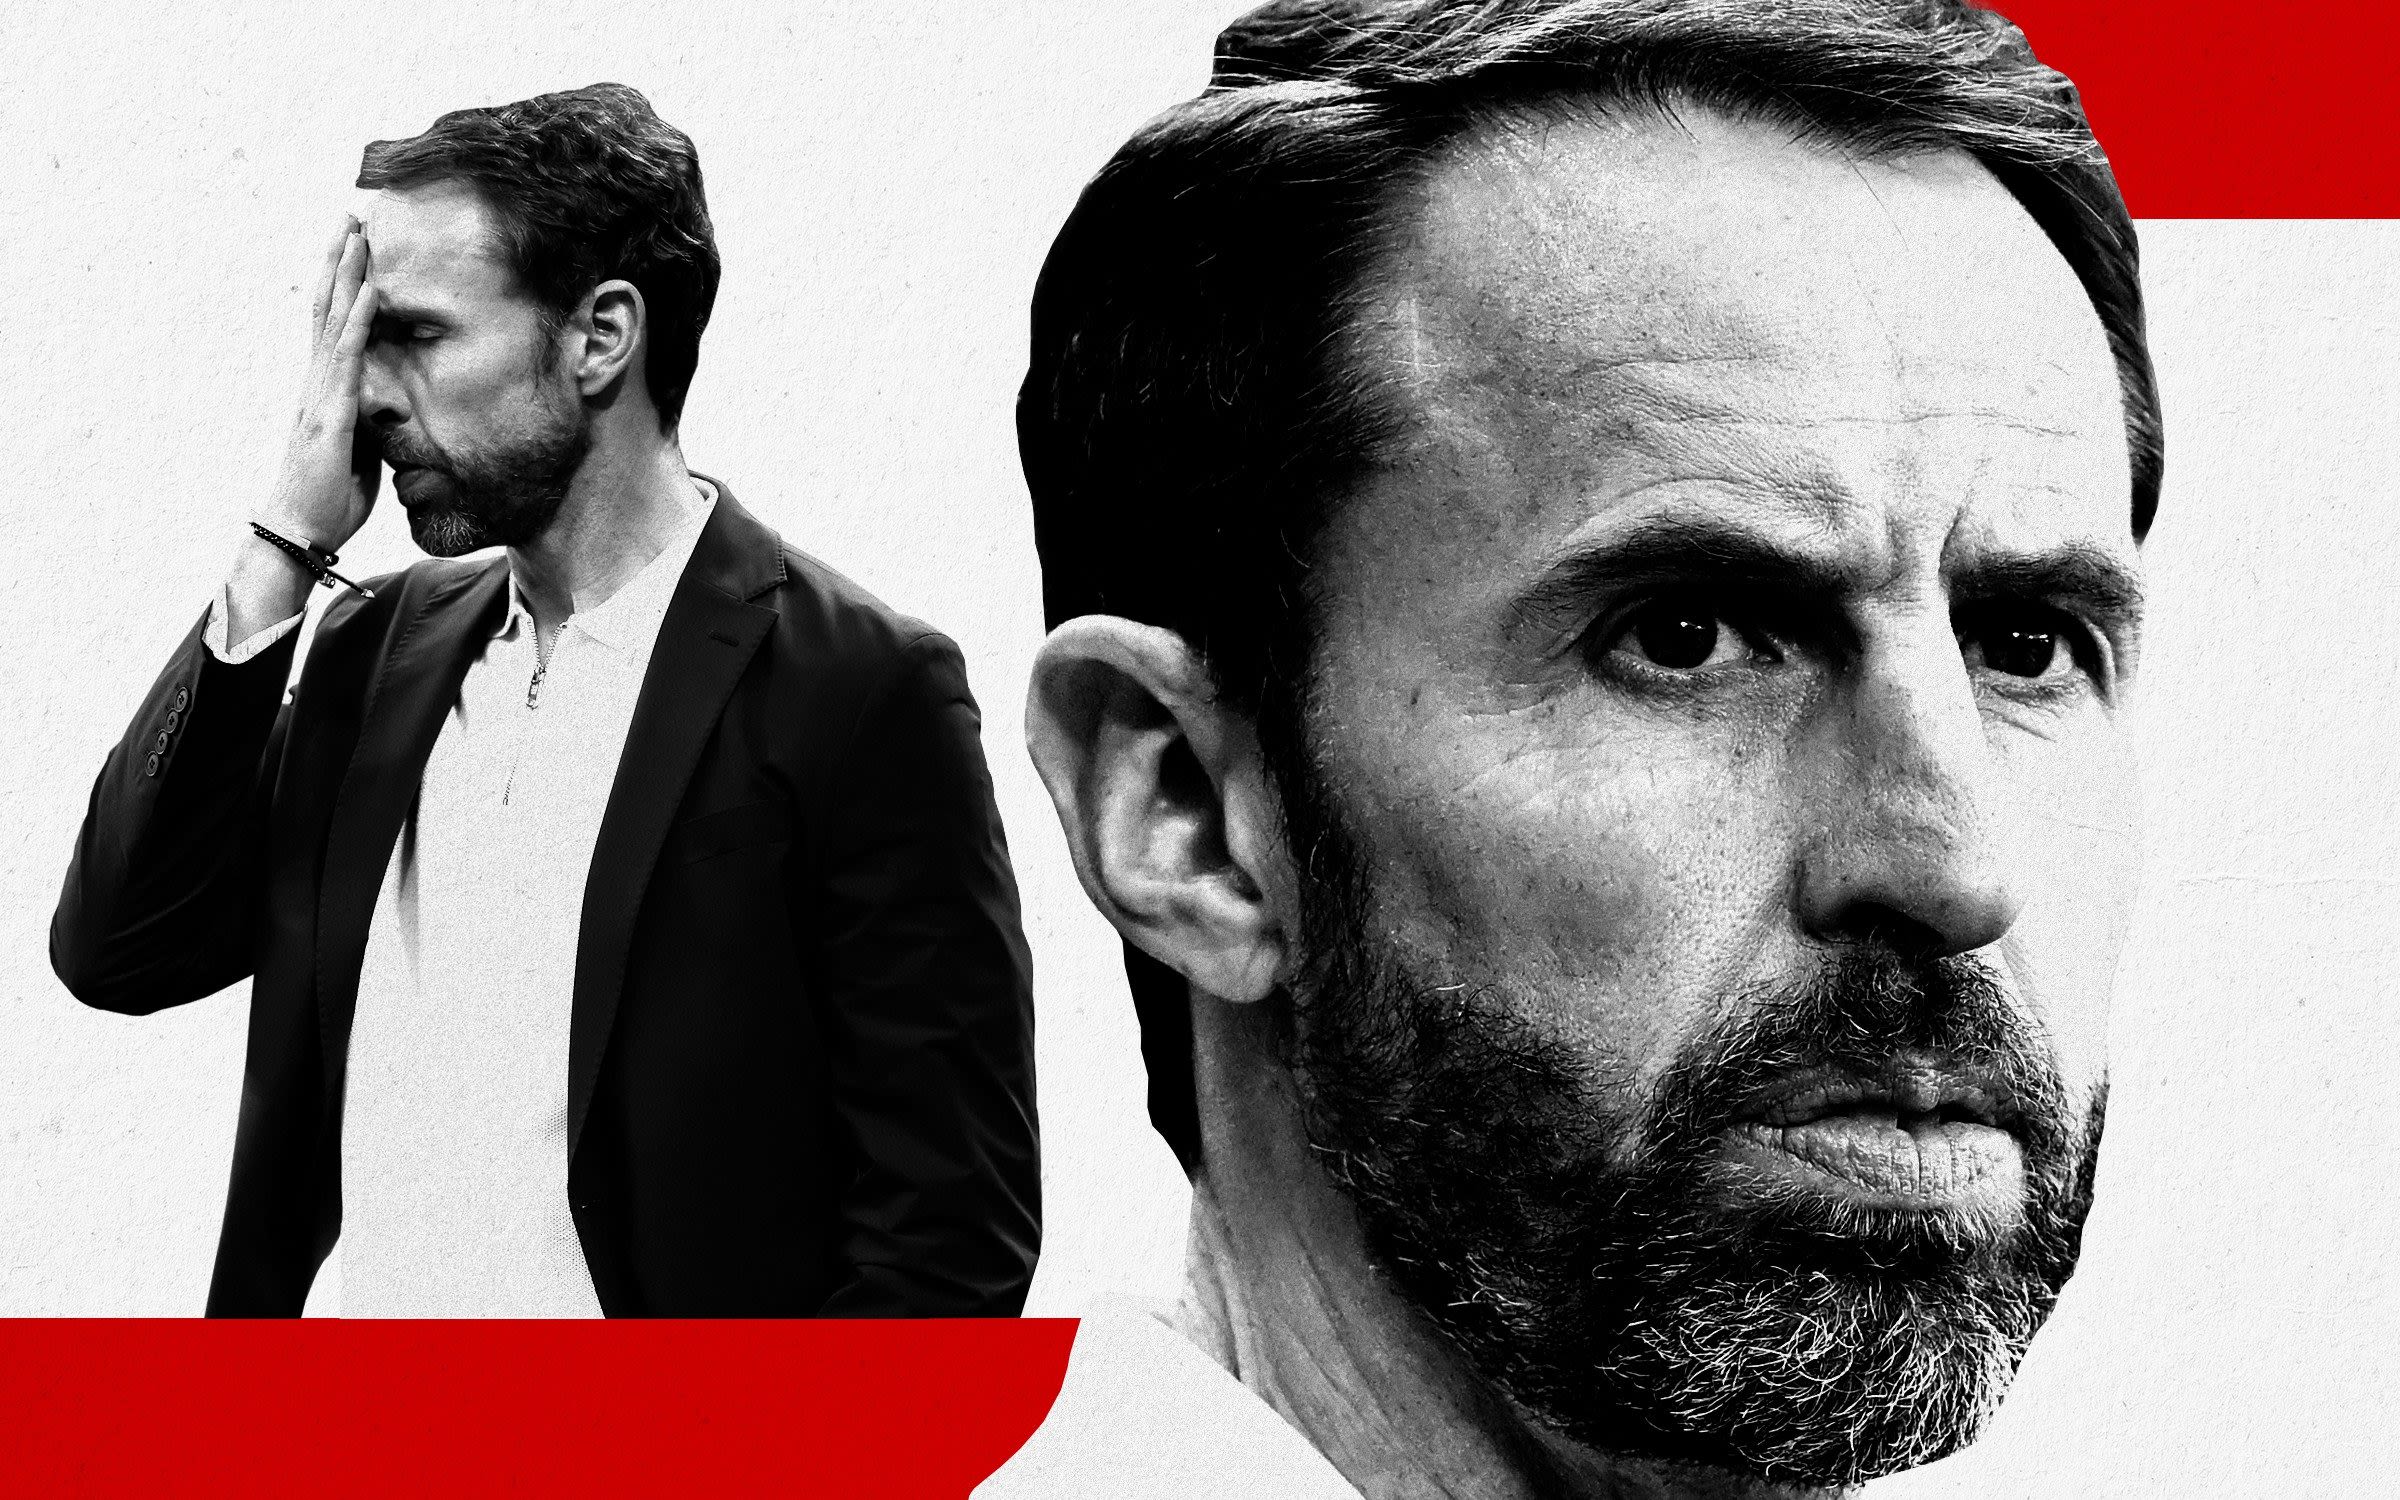 ‘Time for a new chapter,’ says Gareth Southgate on resigning as England manager